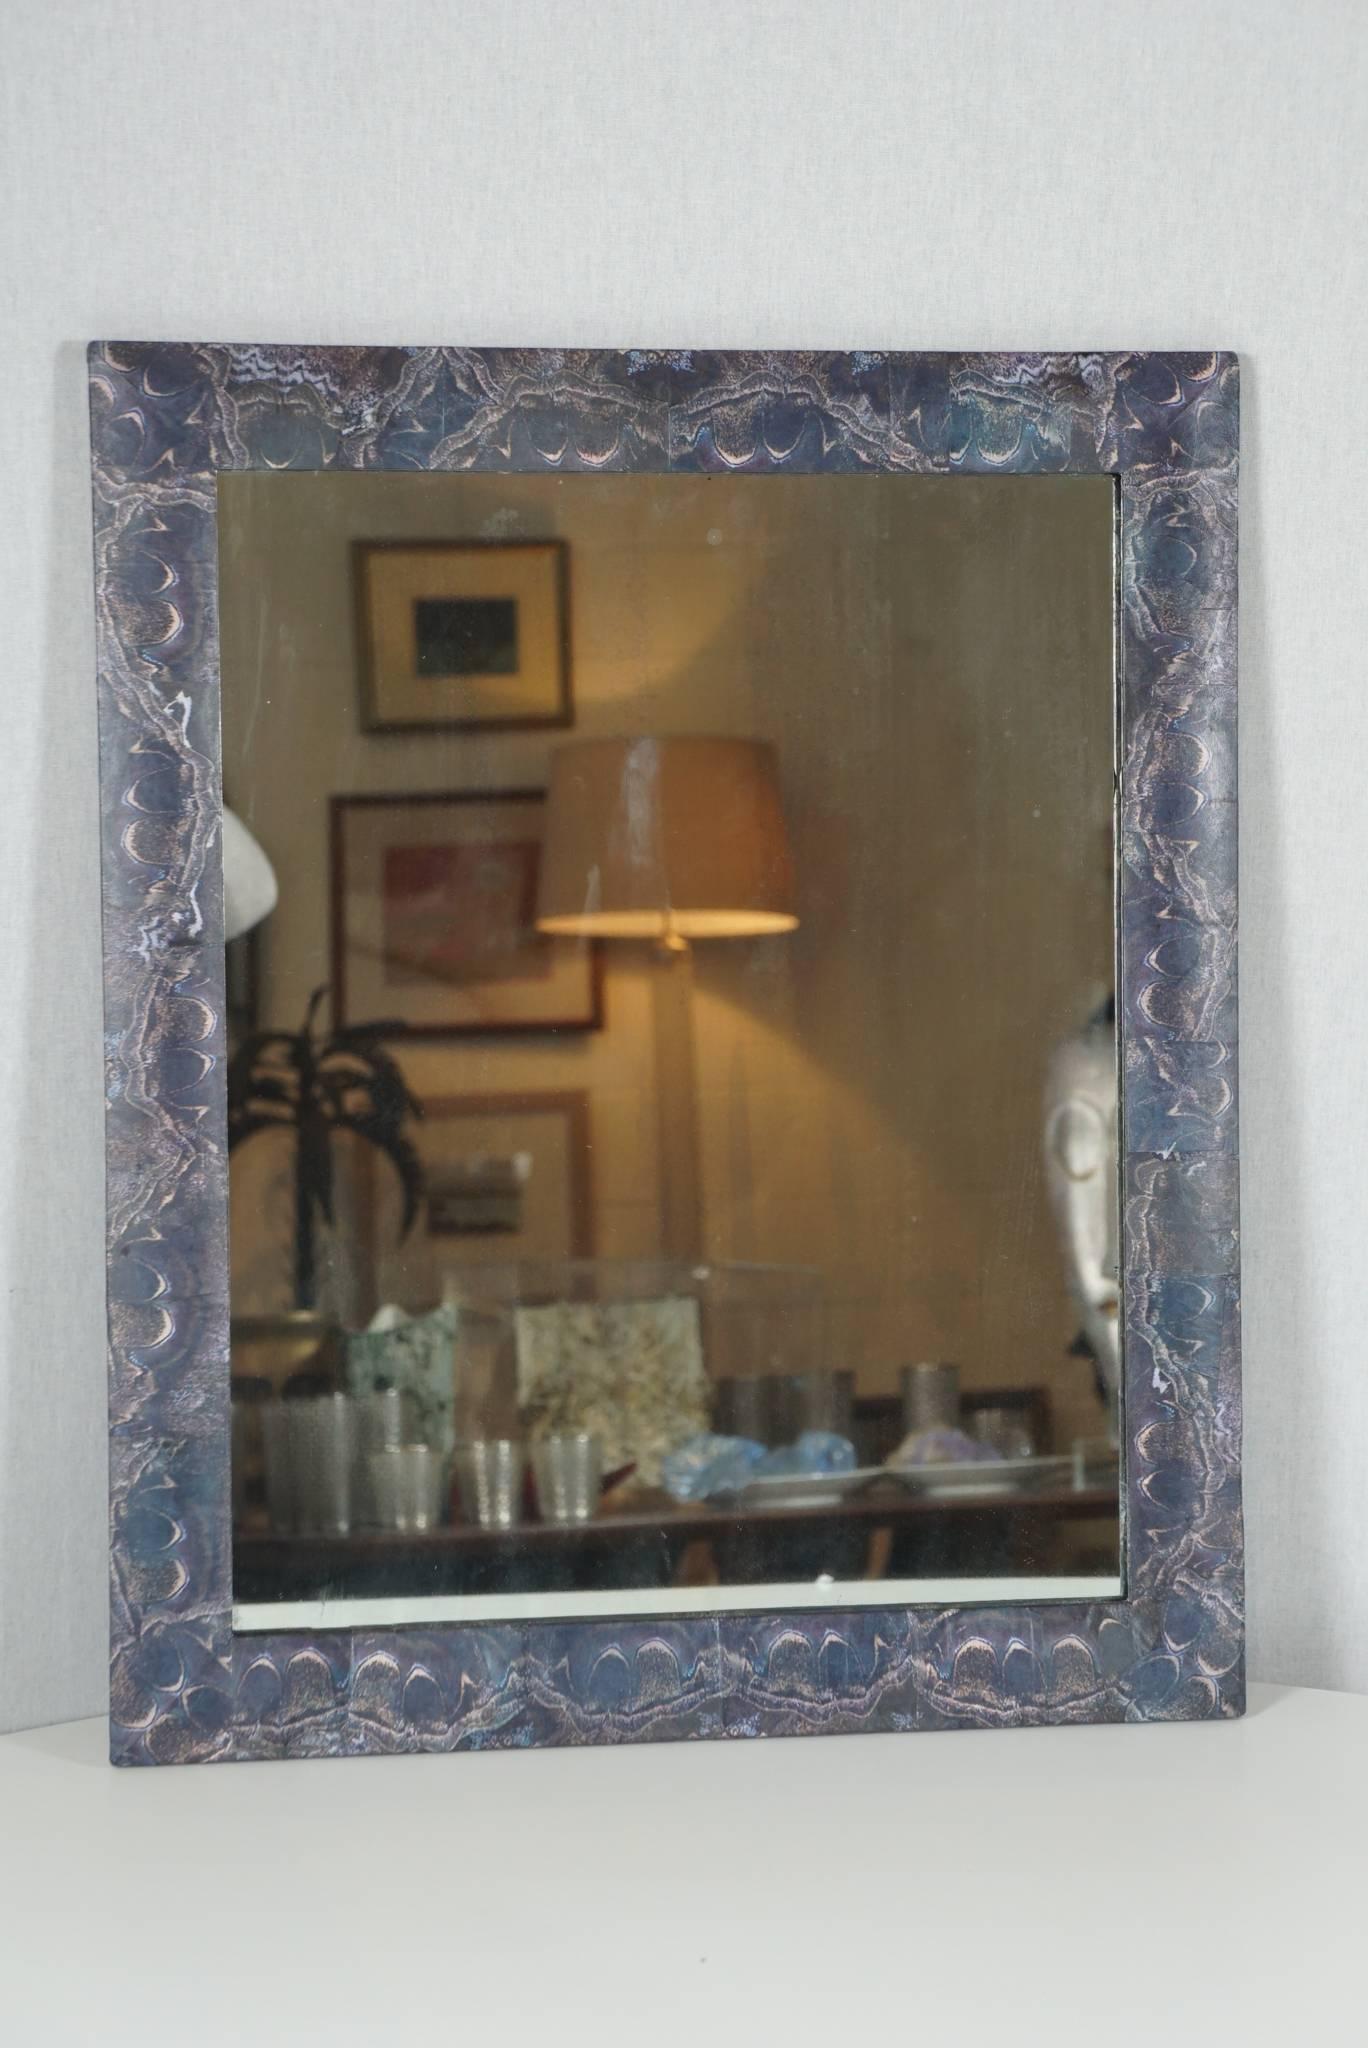 Here is a unique and petit decoupage mirror in a moth wing block pattern. The images are printed paper. The surface has been treated with a clear coat finish for the desired patina and a sealed finish. The original mirror and wood frame is vintage.